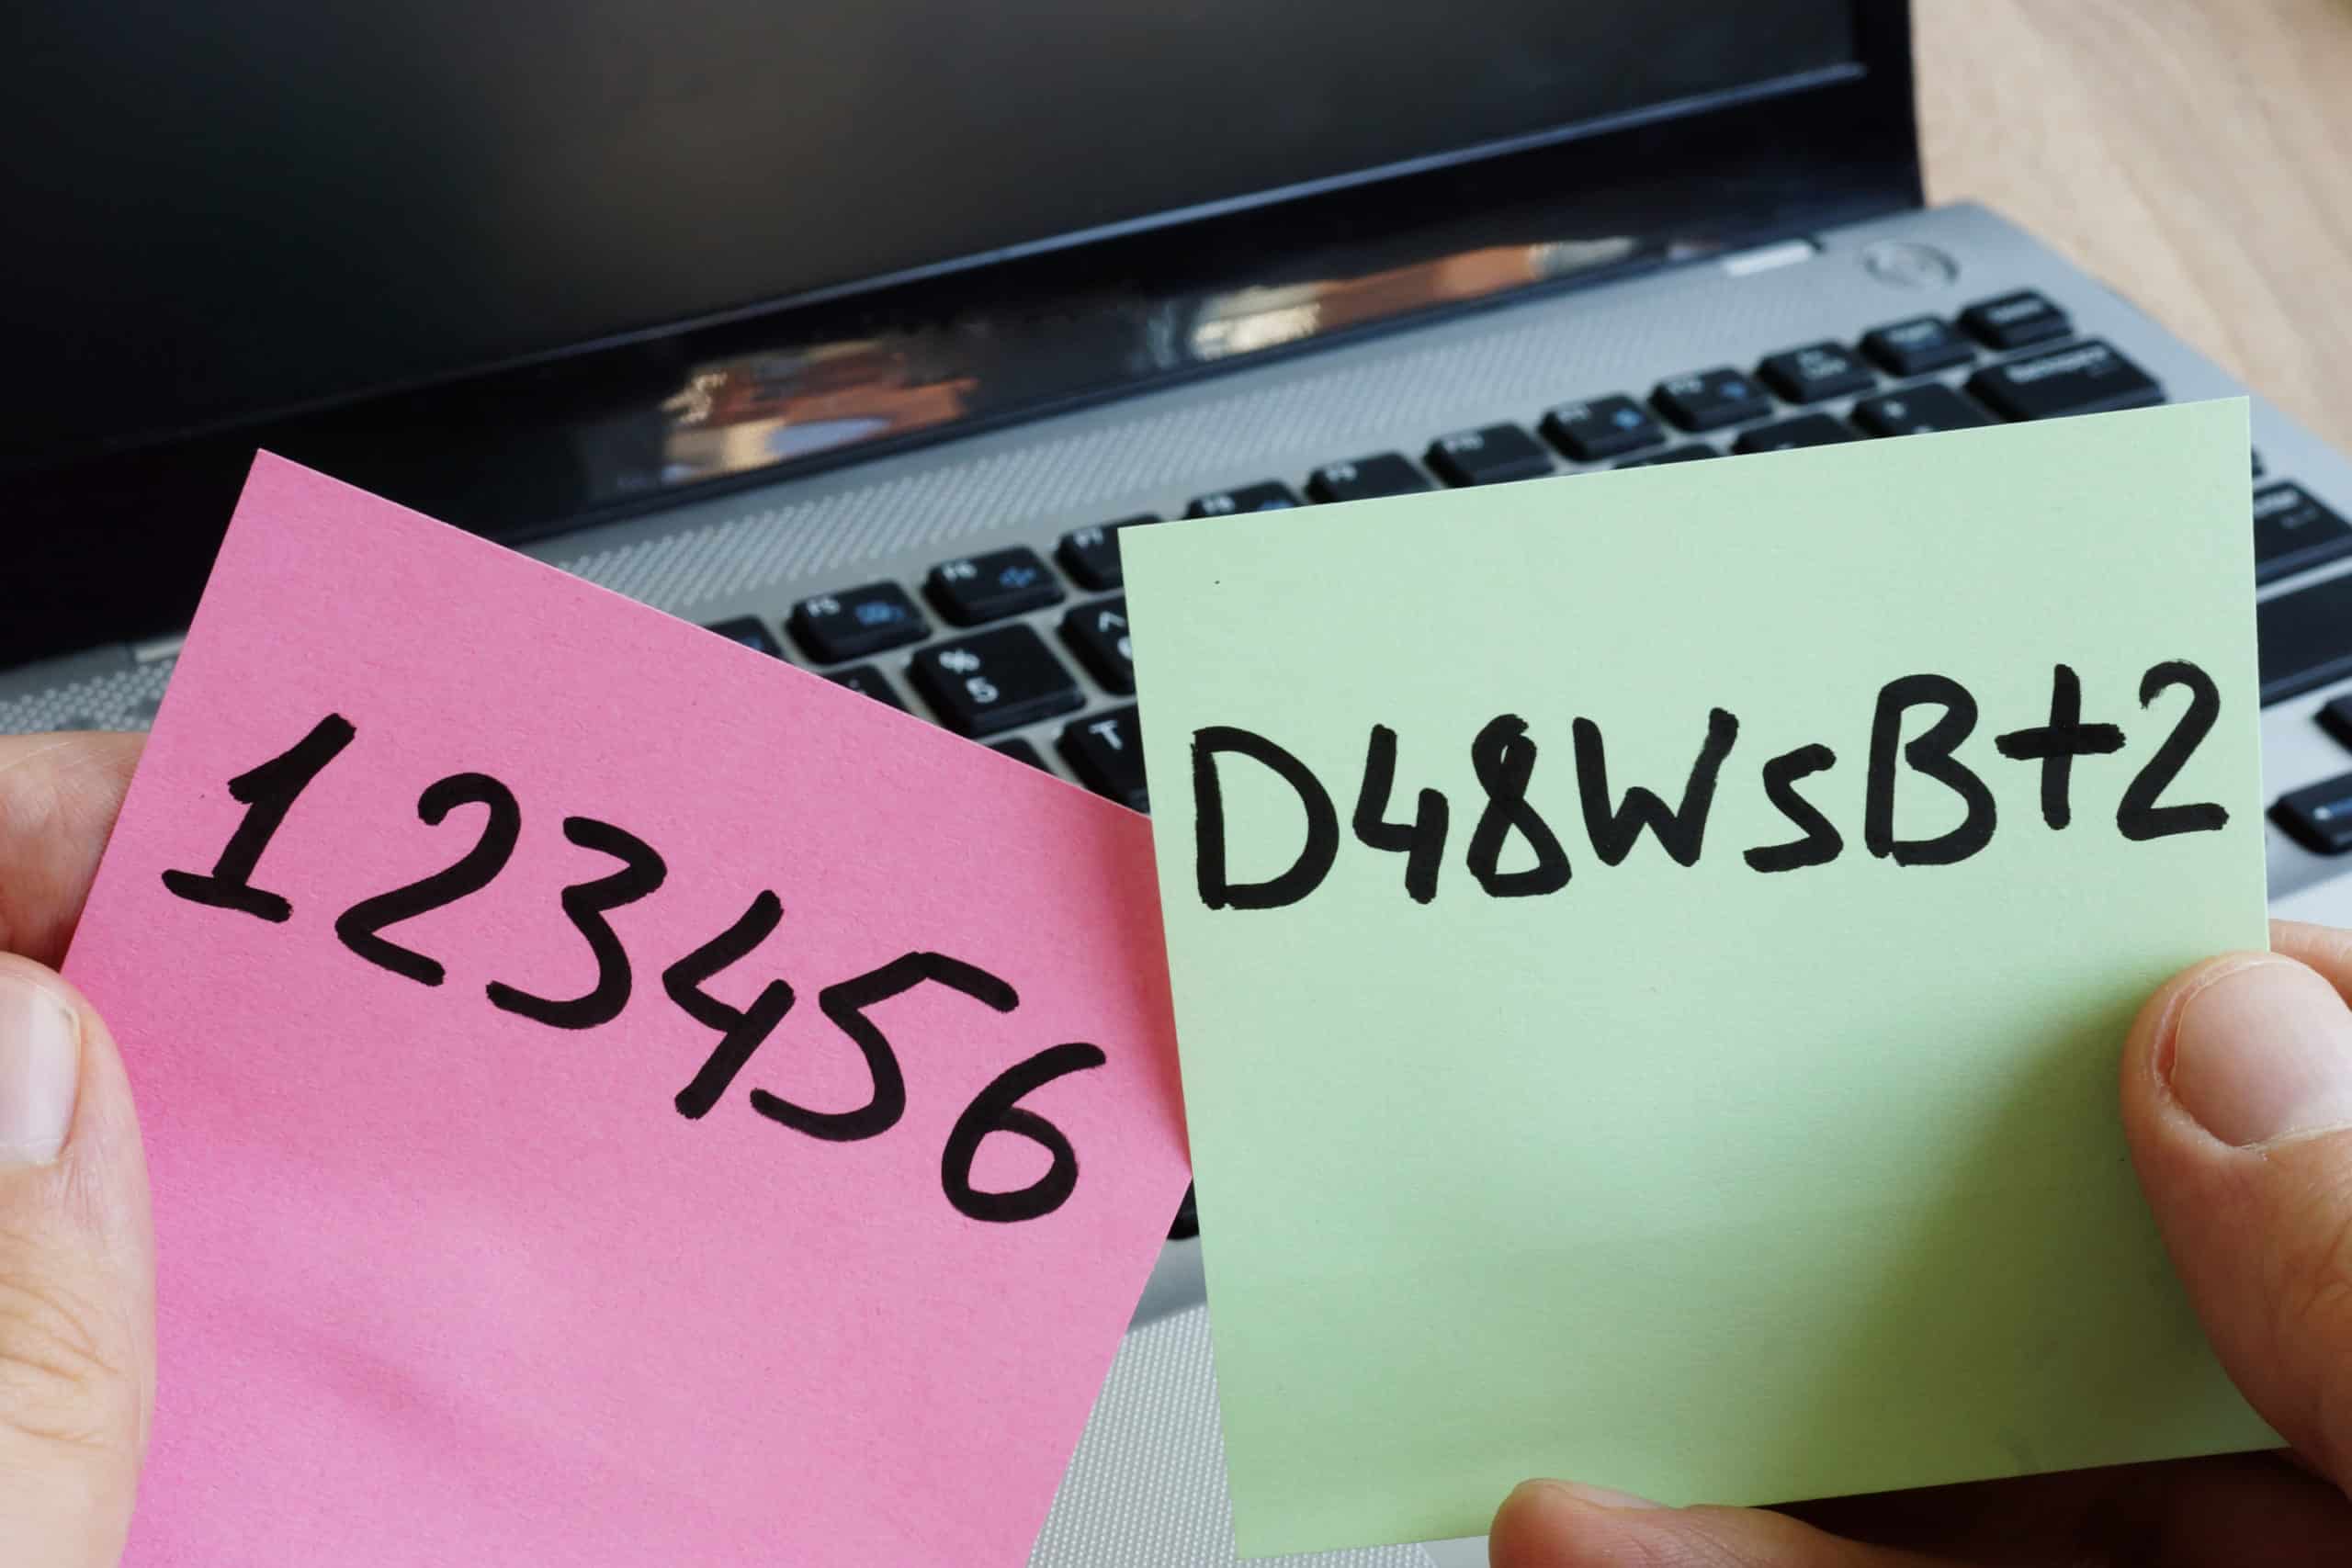 Strong password on a green sticky note and weak password on a pink sticky note.